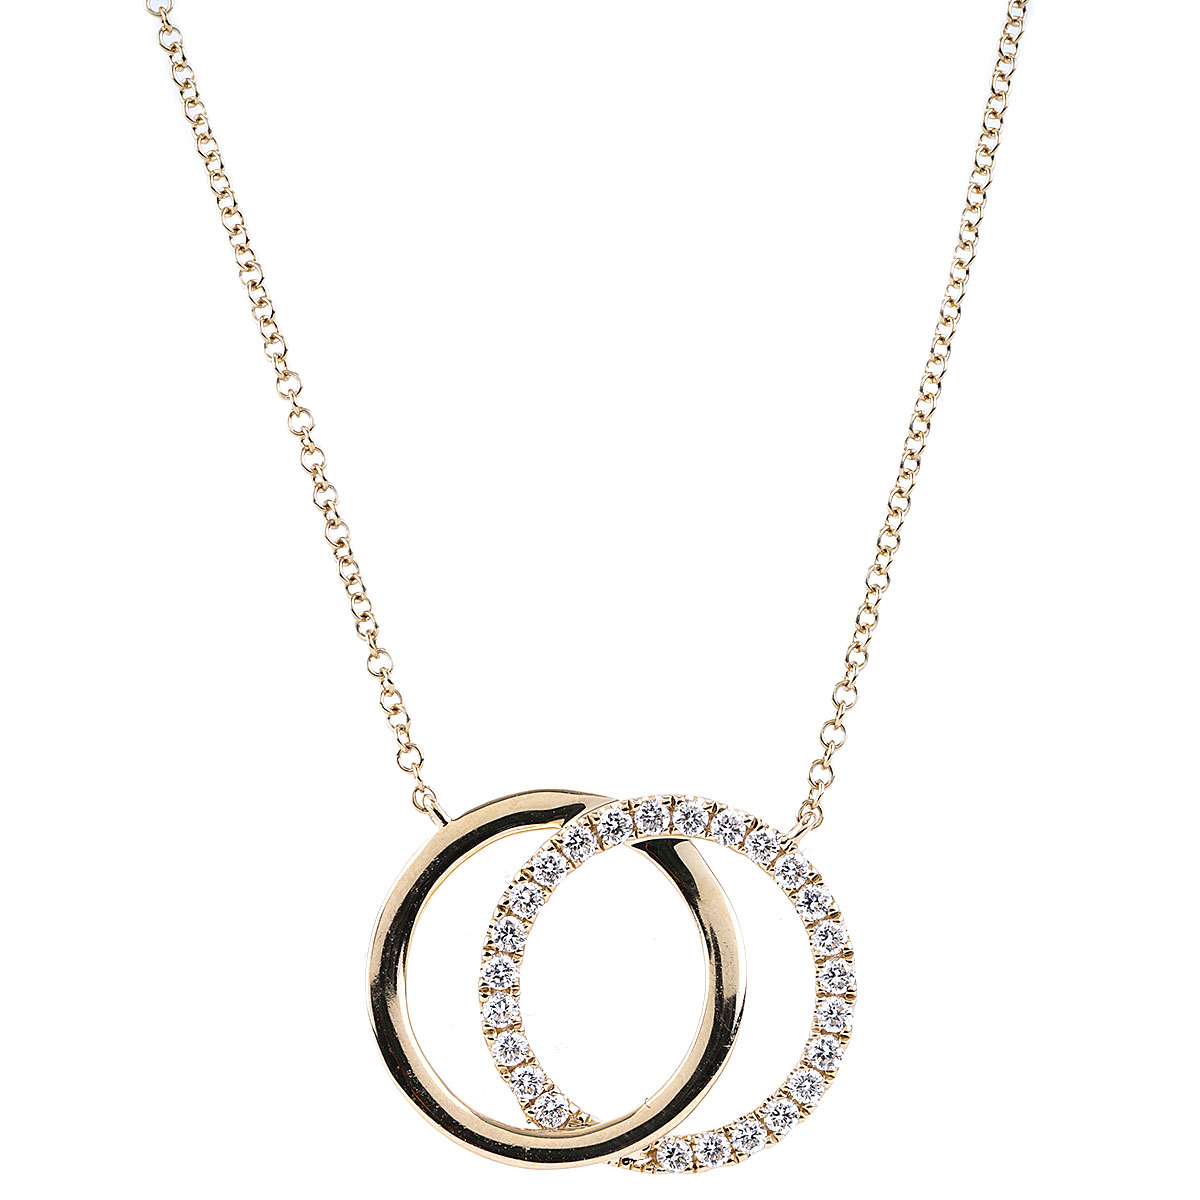 Bloomingdale's Diamond Open Circle Pendant Necklace in 14K White Gold, 4.0  ct. t.w. - 100% Exclusive | Bloomingdale's